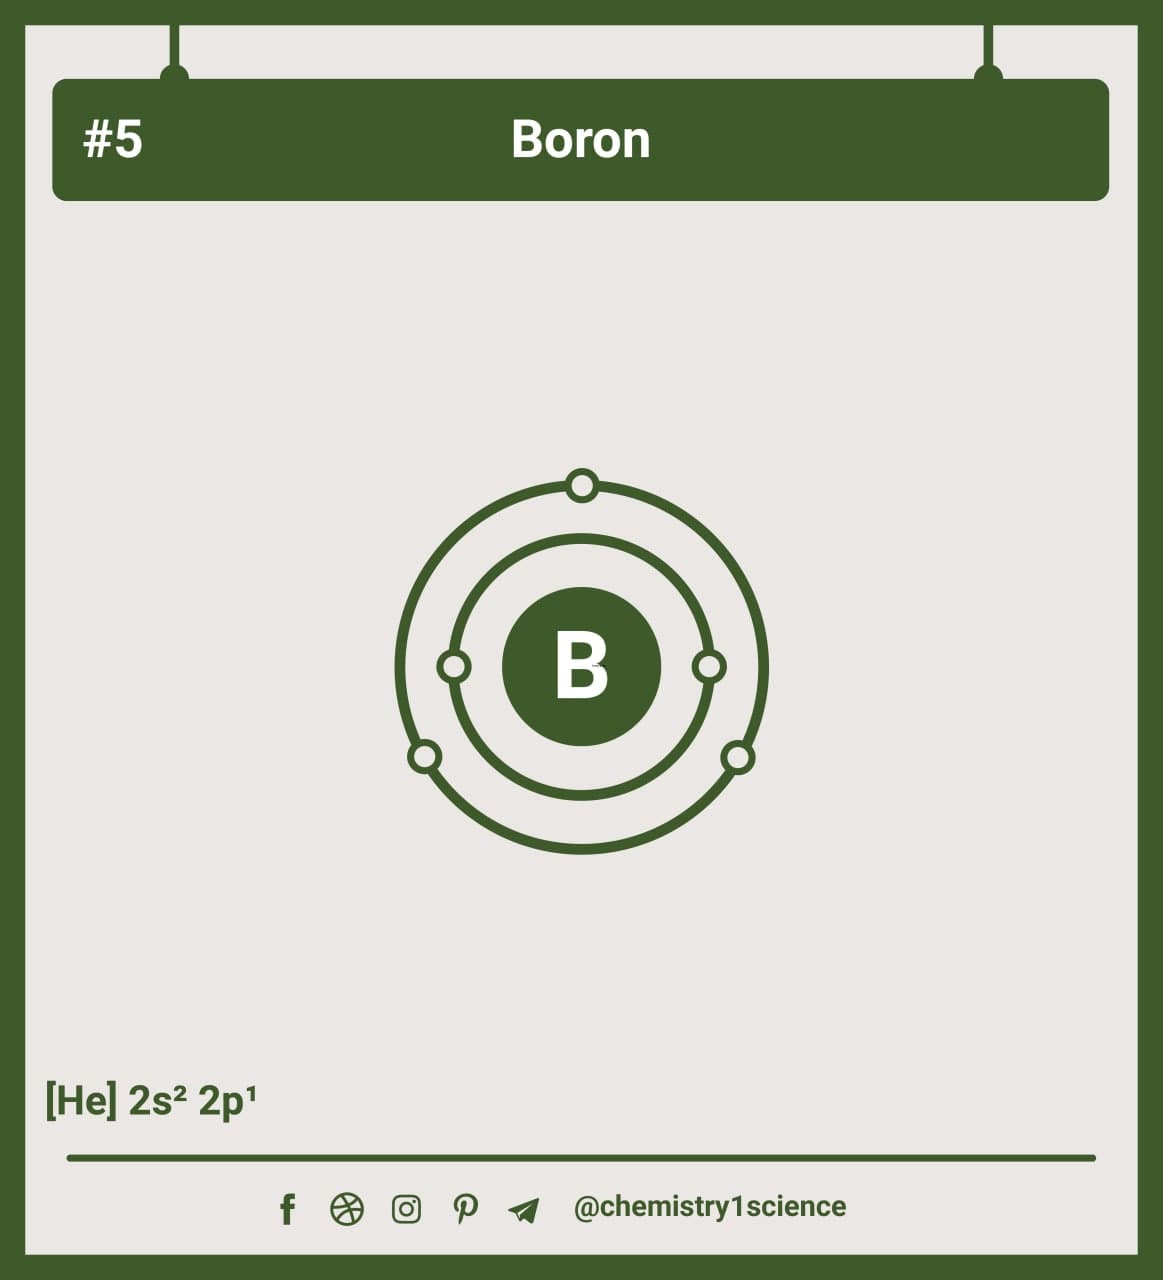 Atom Diagrams Showing Electron Shell Configurations of the Boron